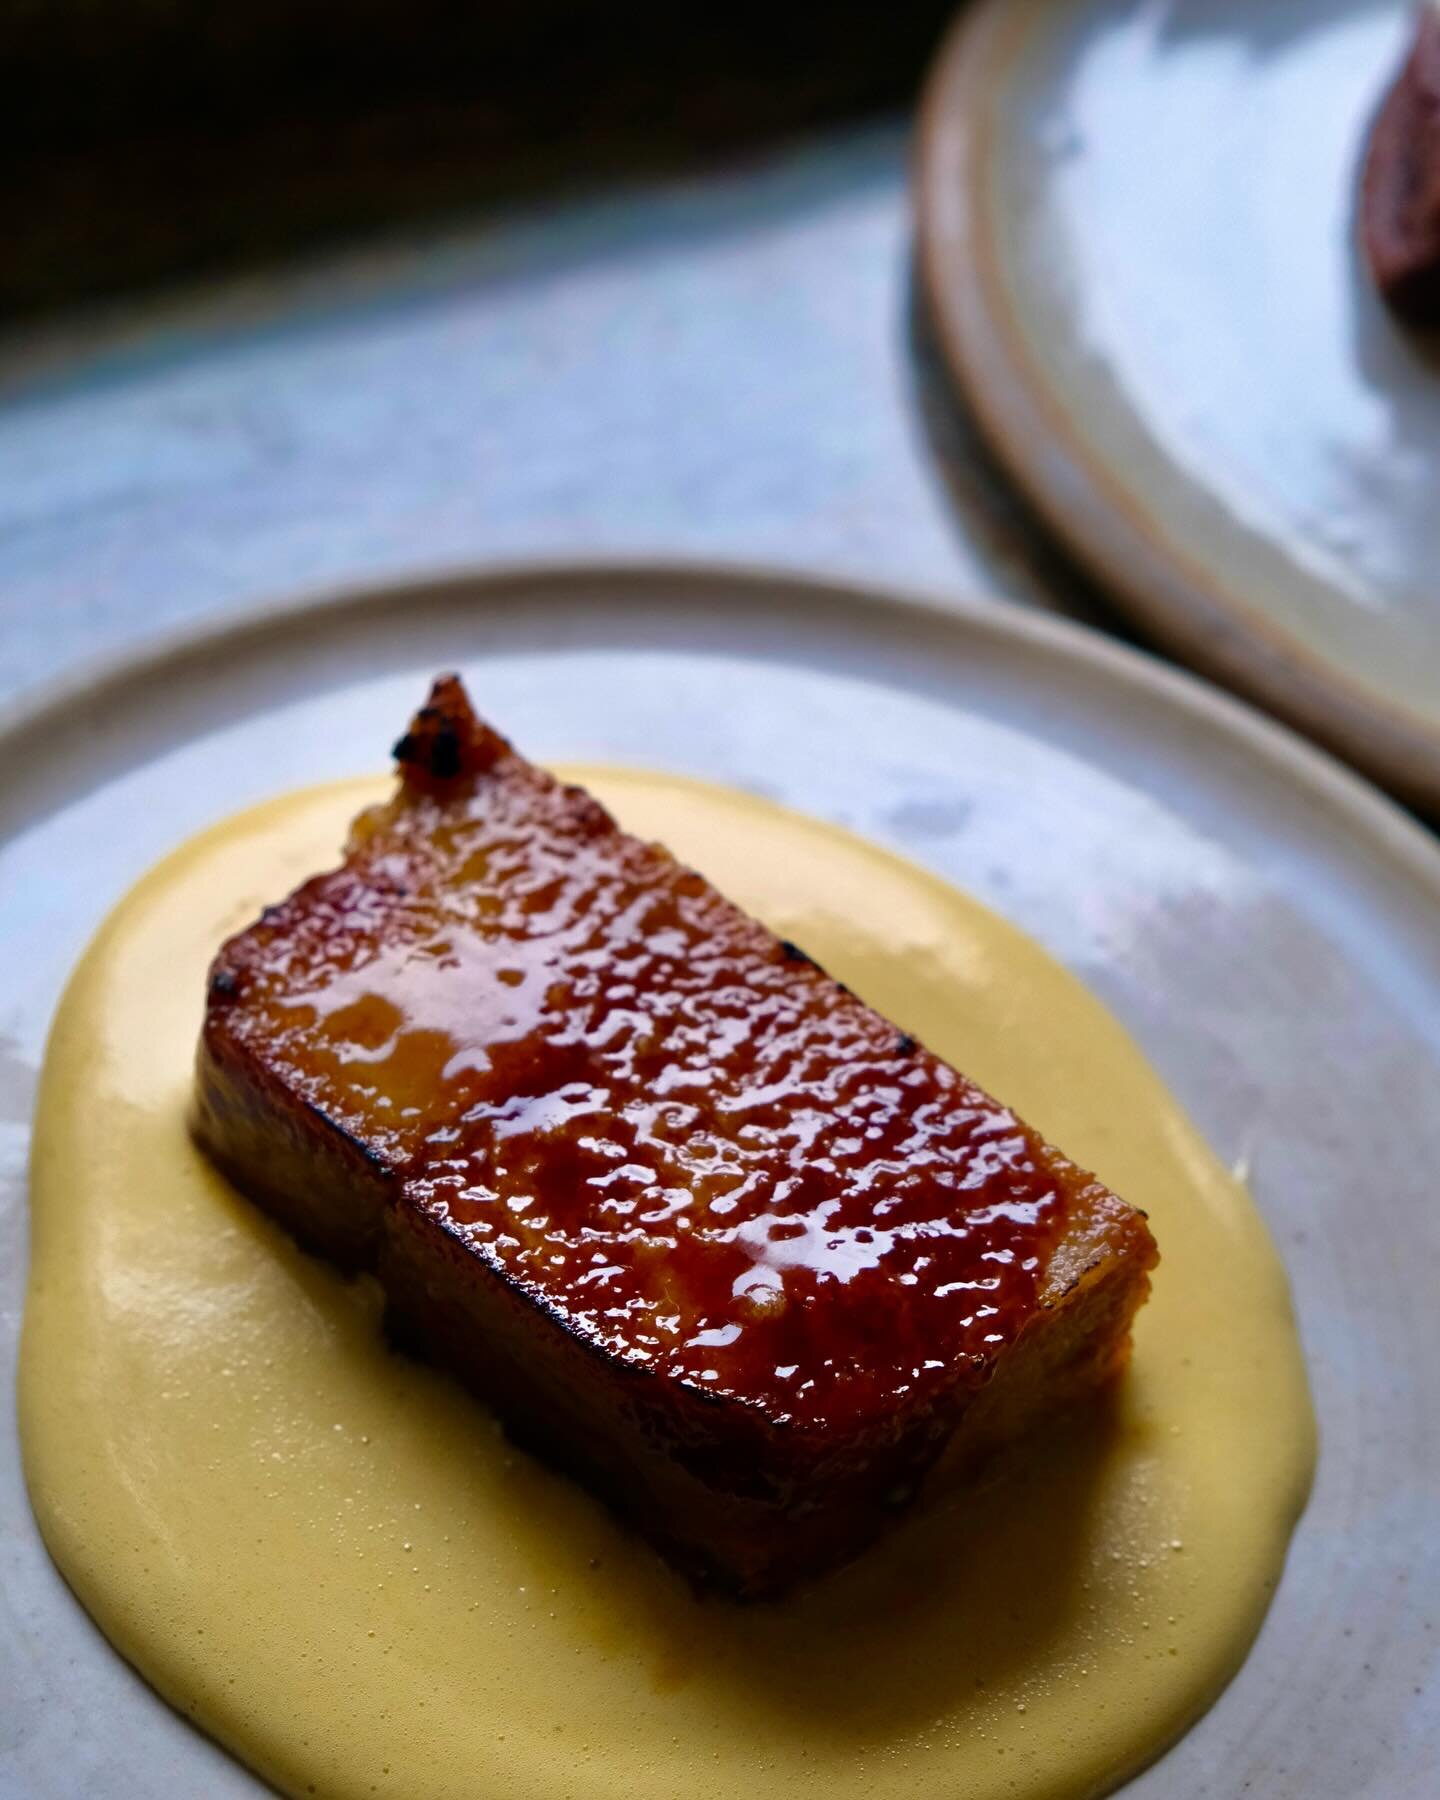 BREAD PUDDING br&ucirc;l&eacute;ed with sherry sabayon

The perfect Sunday pick me up! This cr&egrave;me br&ucirc;l&eacute;e, a la flan style bread pudding, has all the nostalgia of childhood packed into a modern interpretation. The brain child of @a